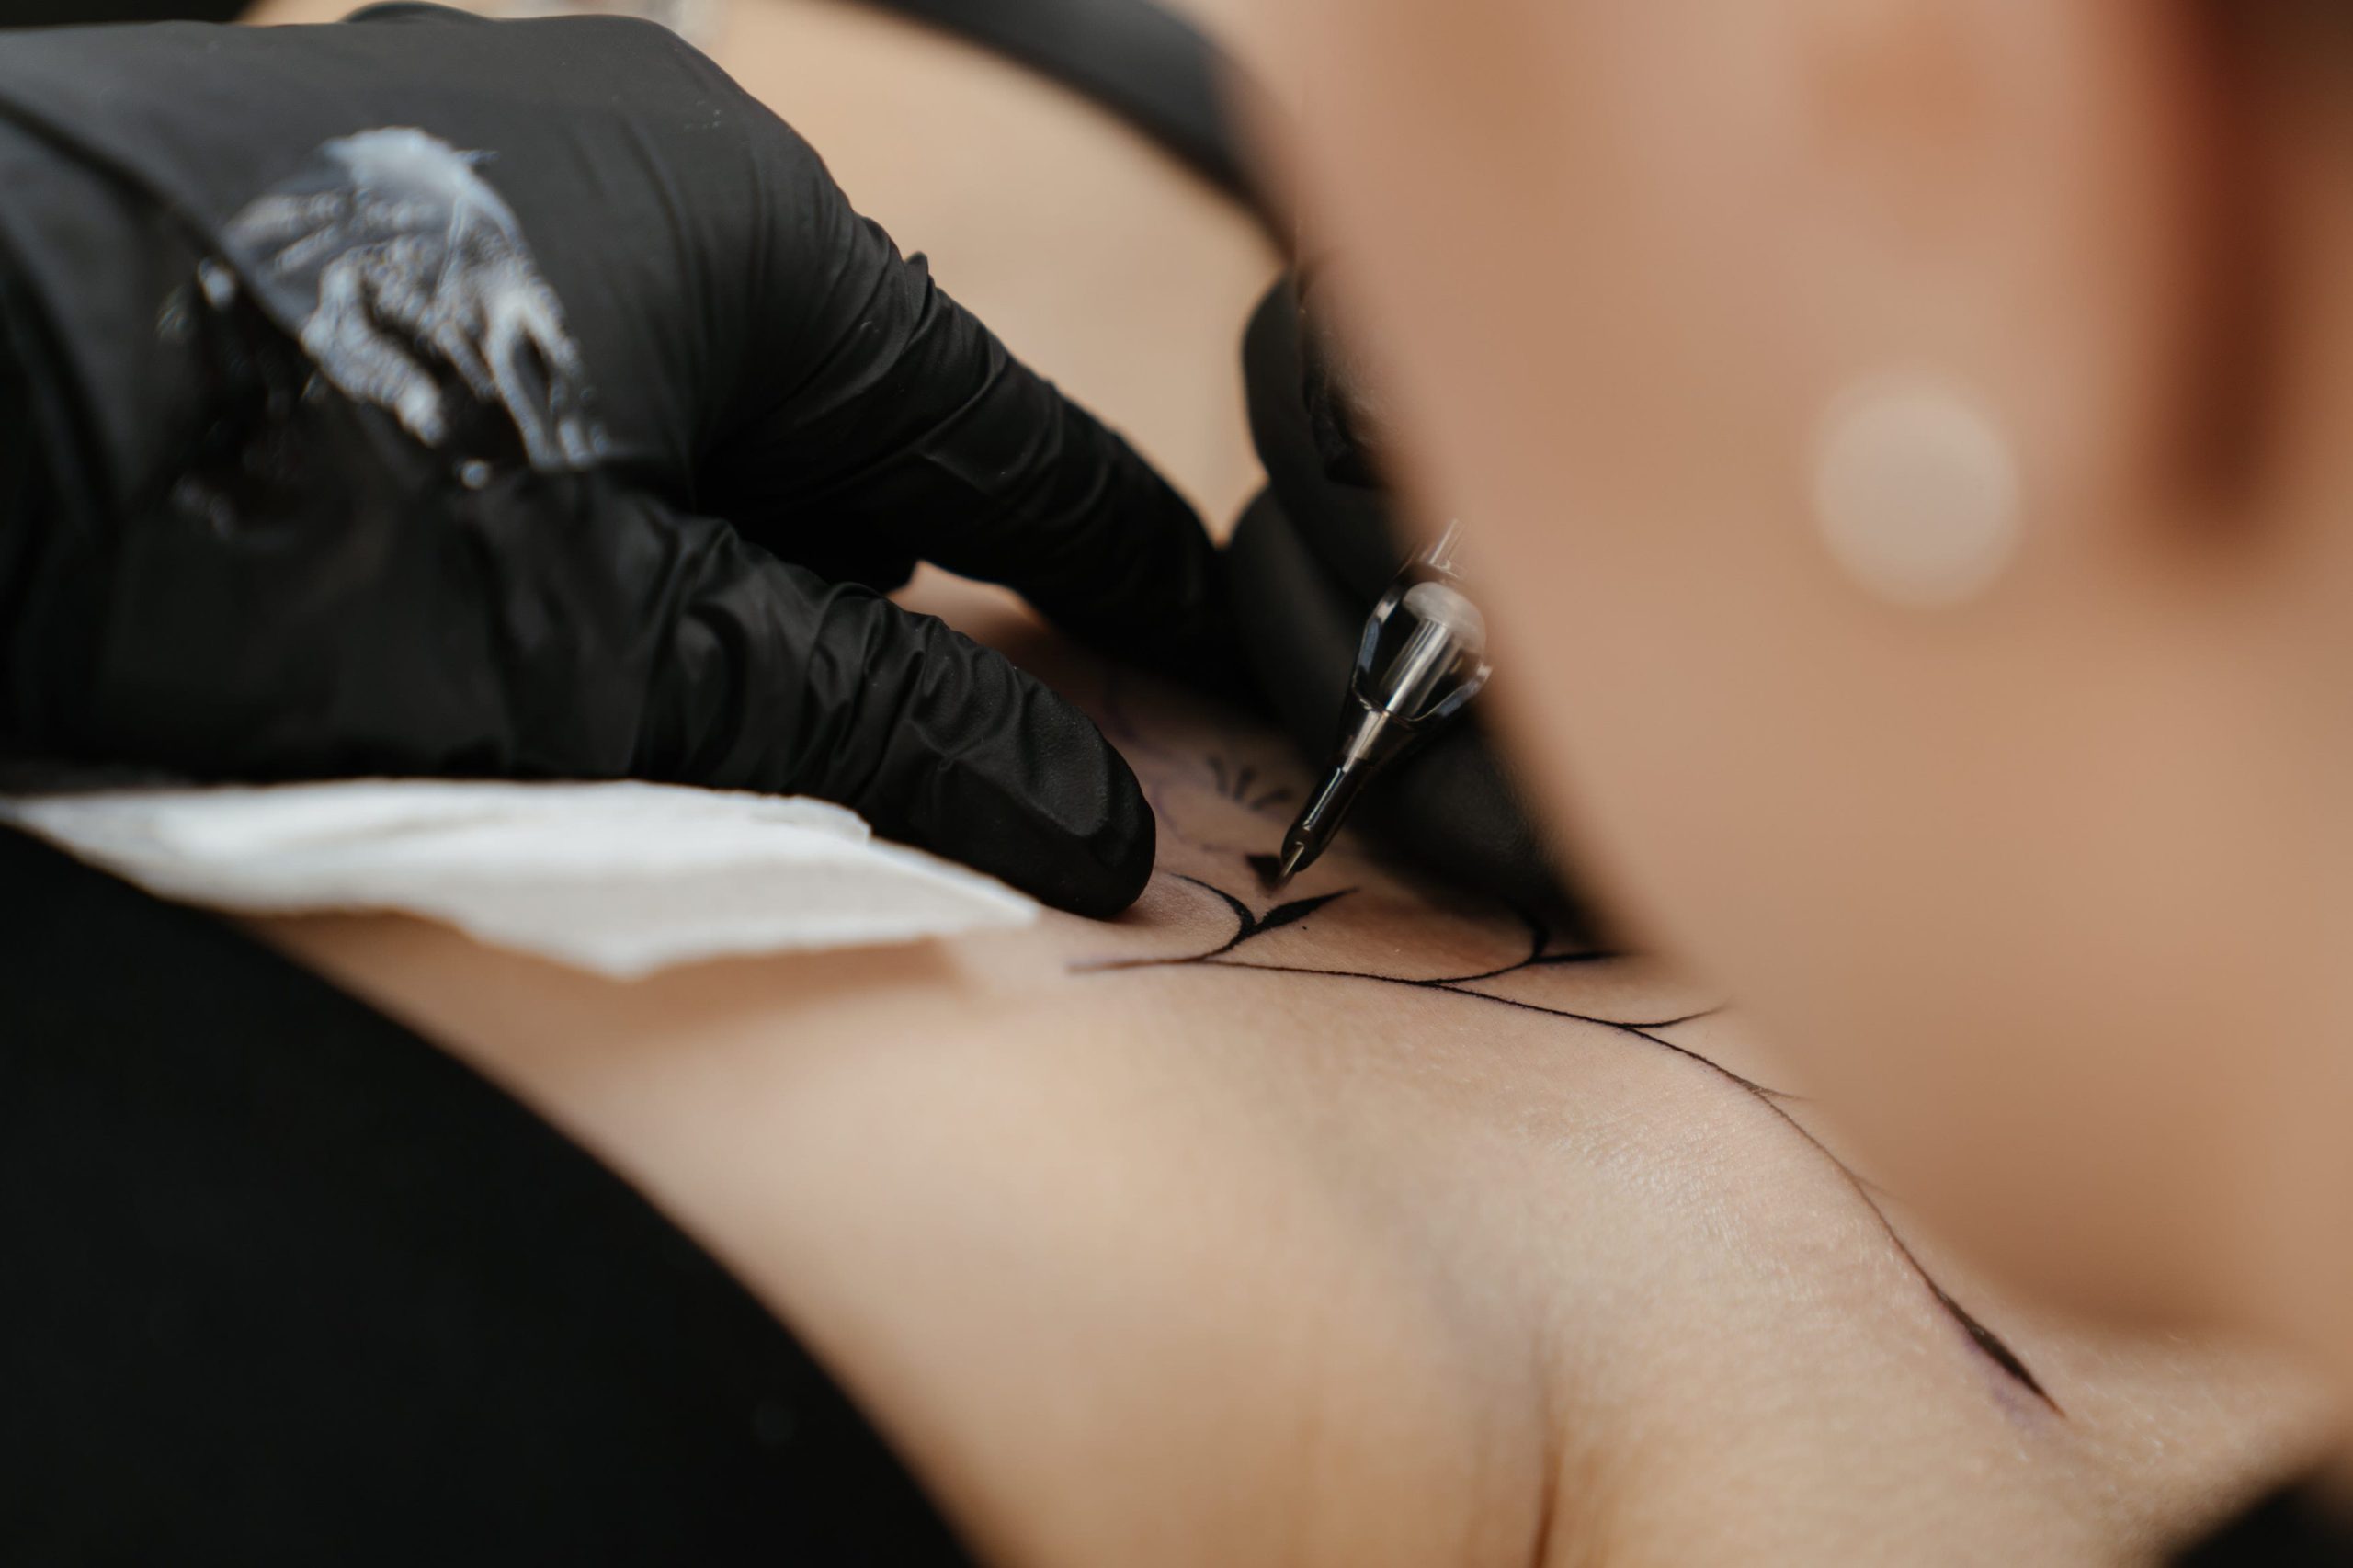 Planning To Get Inked? Know The Risk Associated With Tattoos